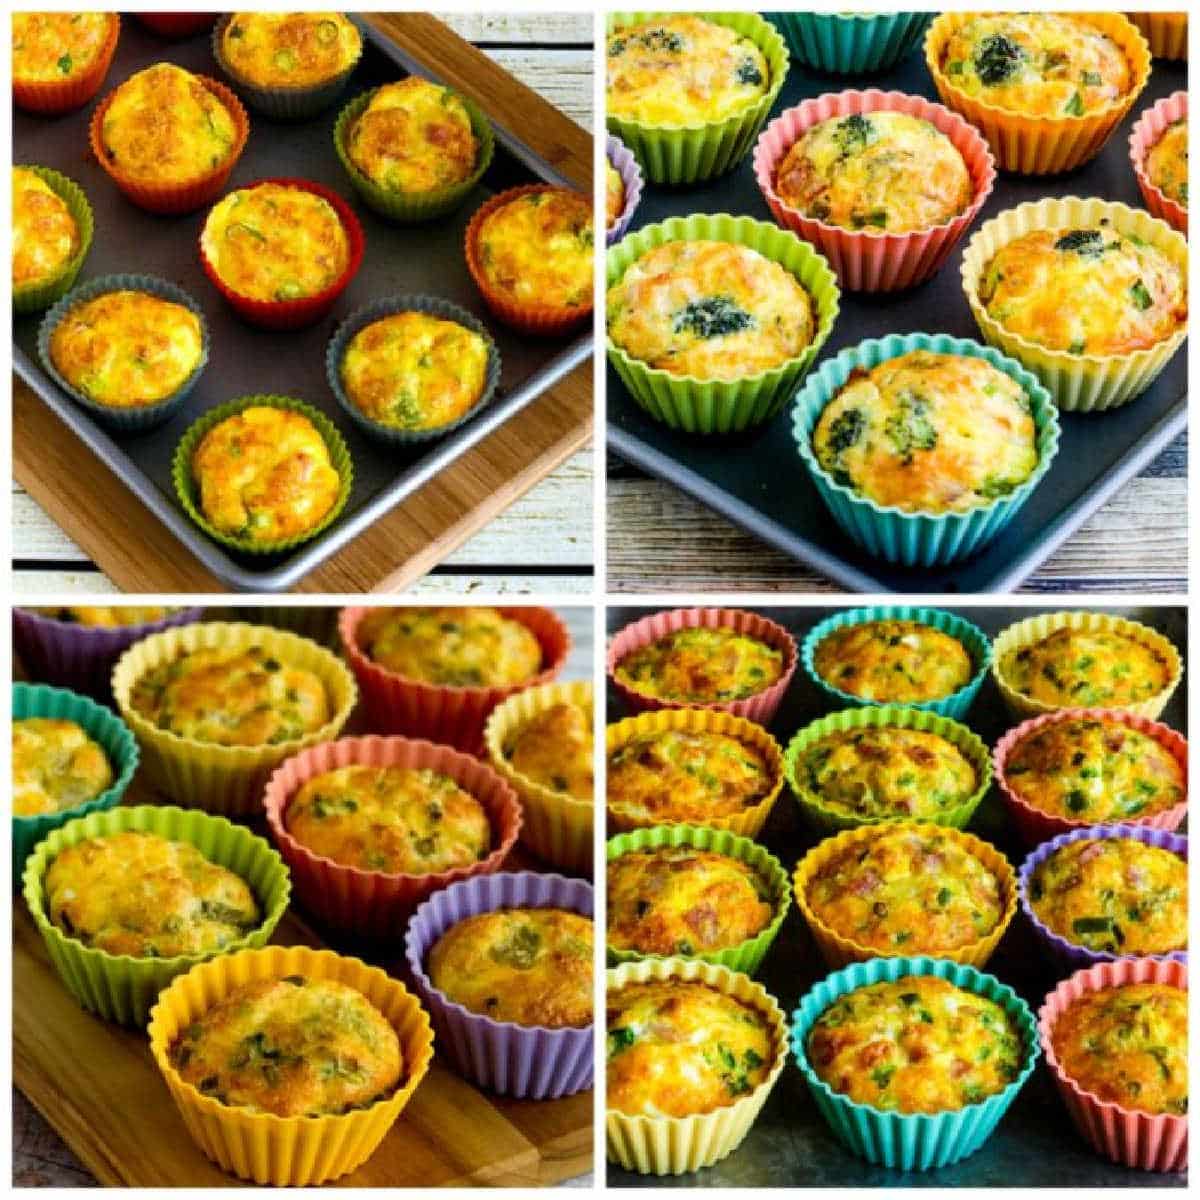 Keto Egg Muffins collage showing variations of egg muffin recipes